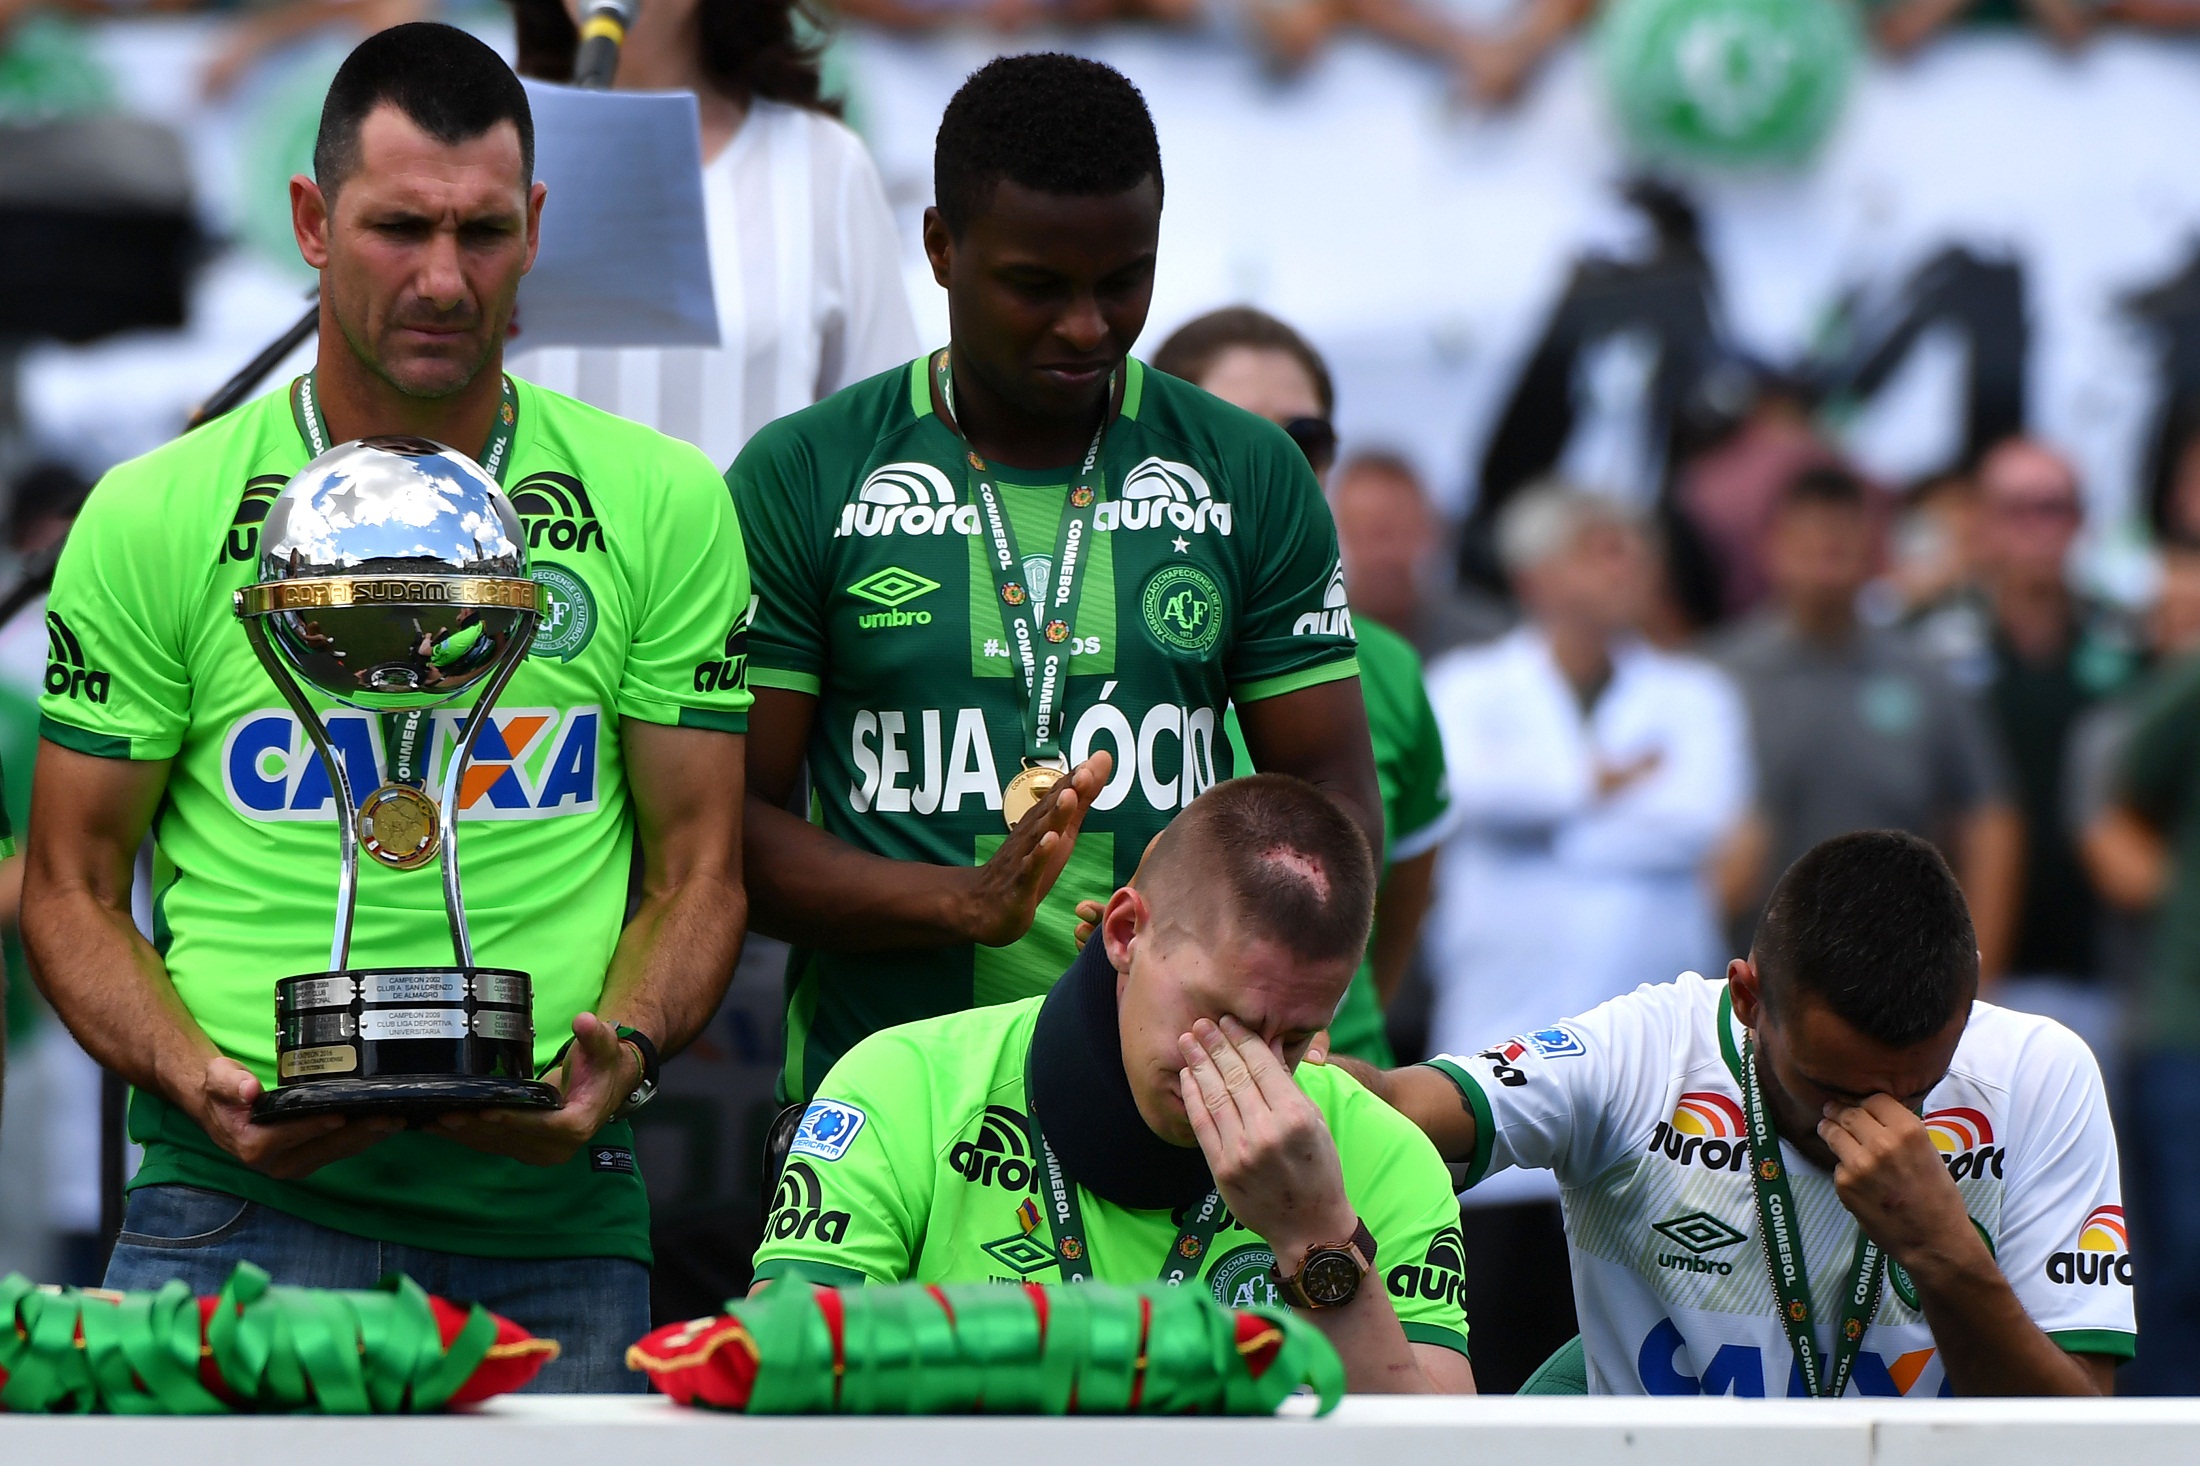 Brazilian Chapecoense footballers Alan Ruschel (R) and Jackson Follmann (C), survivors of the LaMia airplane crash in Colombia, receive the Copa Sudamericana trophy at the Arena Conda stadium in Chapeco, Santa Catarina state, in southern Brazil on January 21, 2017, before a friendly match against Palmeiras - Brazilian Champion 2016.  Most of the members of the Chapocoense football team perished in a November 28, 2016 plane crash in Colombia. / AFP PHOTO / NELSON ALMEIDA